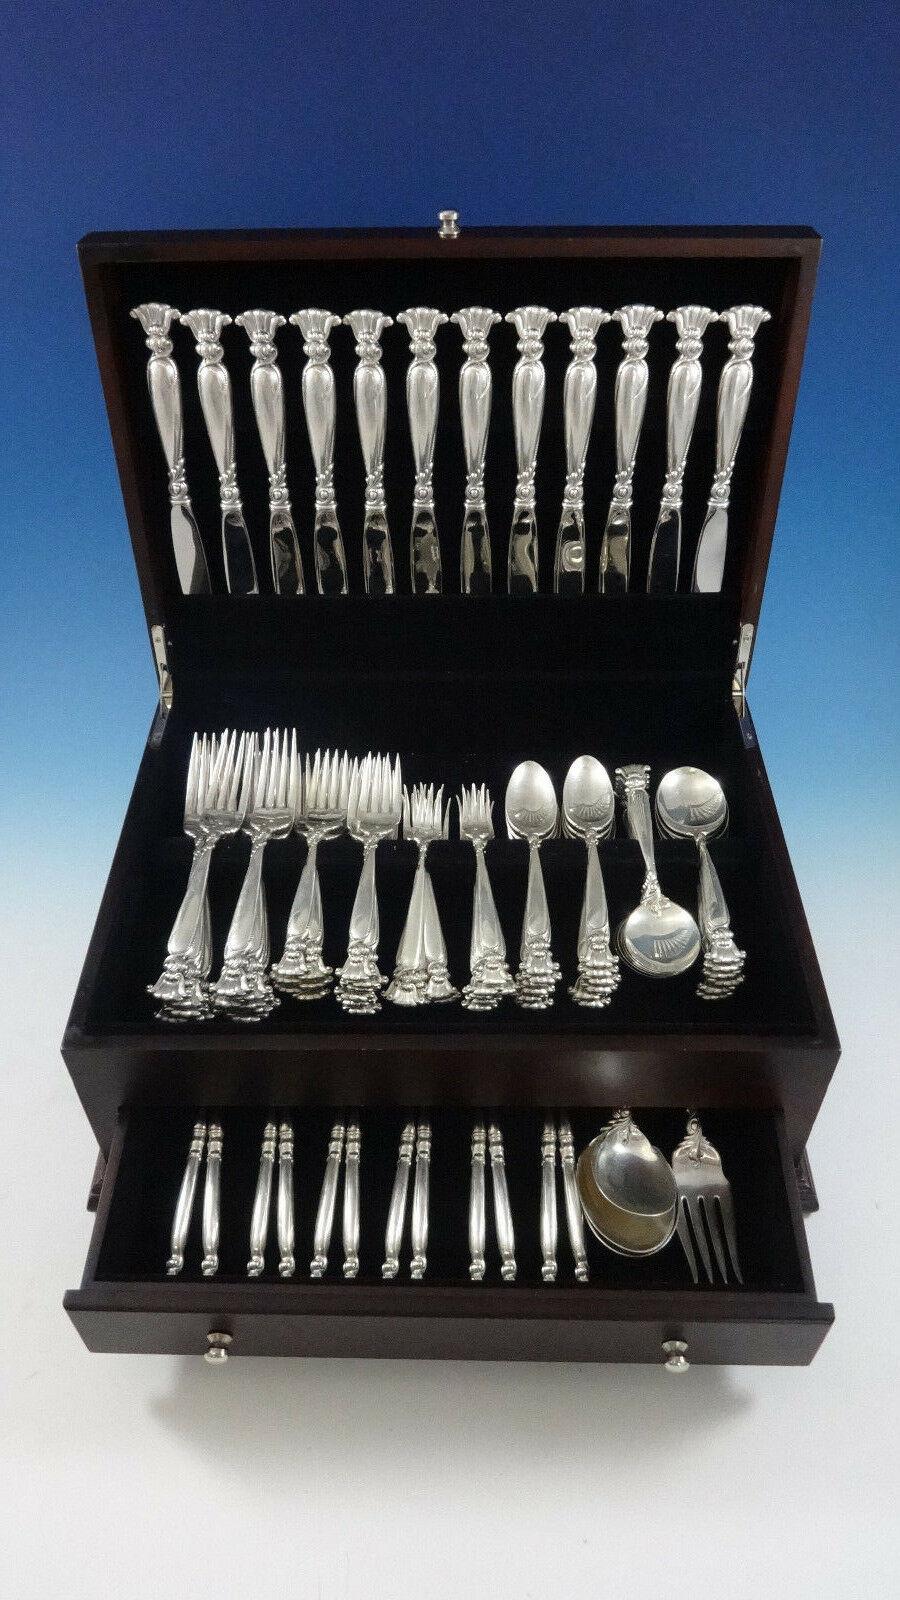 Romance of the sea by Wallace sterling silver flatware set - 88 pieces. This set includes:

12 knives, 9 1/8